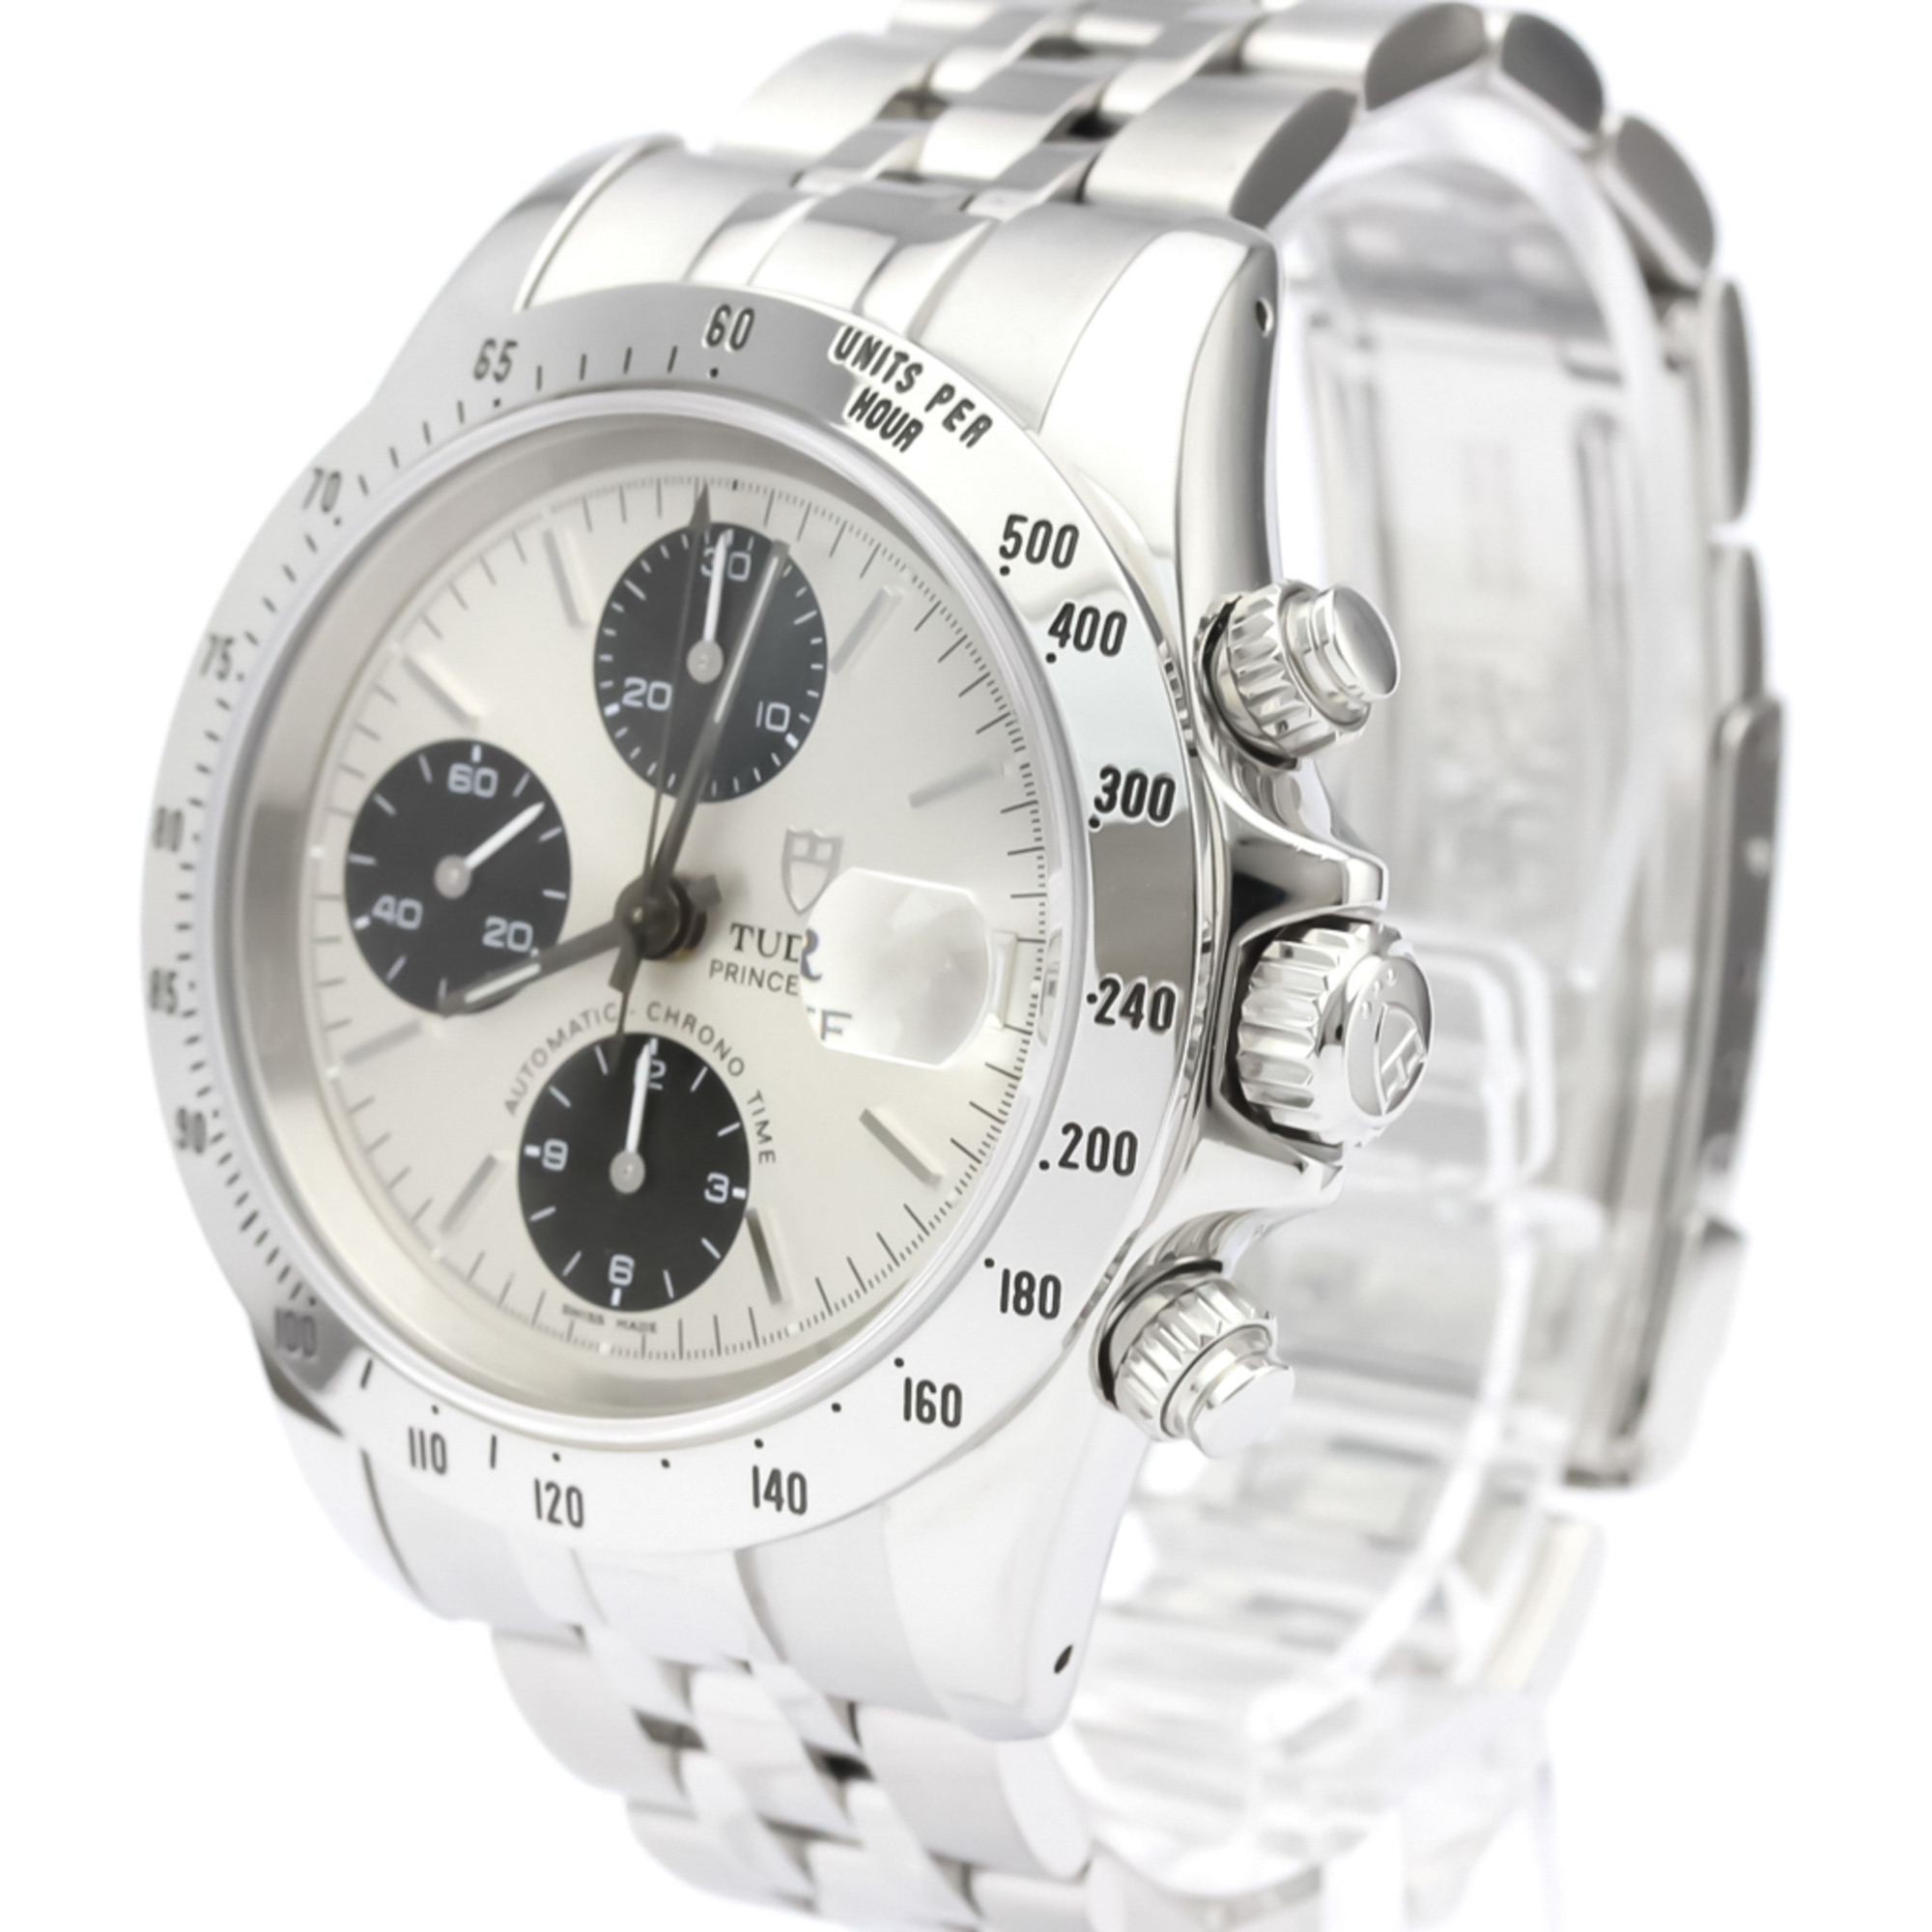 Tudor Chrono Time Automatic Stainless Steel Men's Sports Watch 79280P